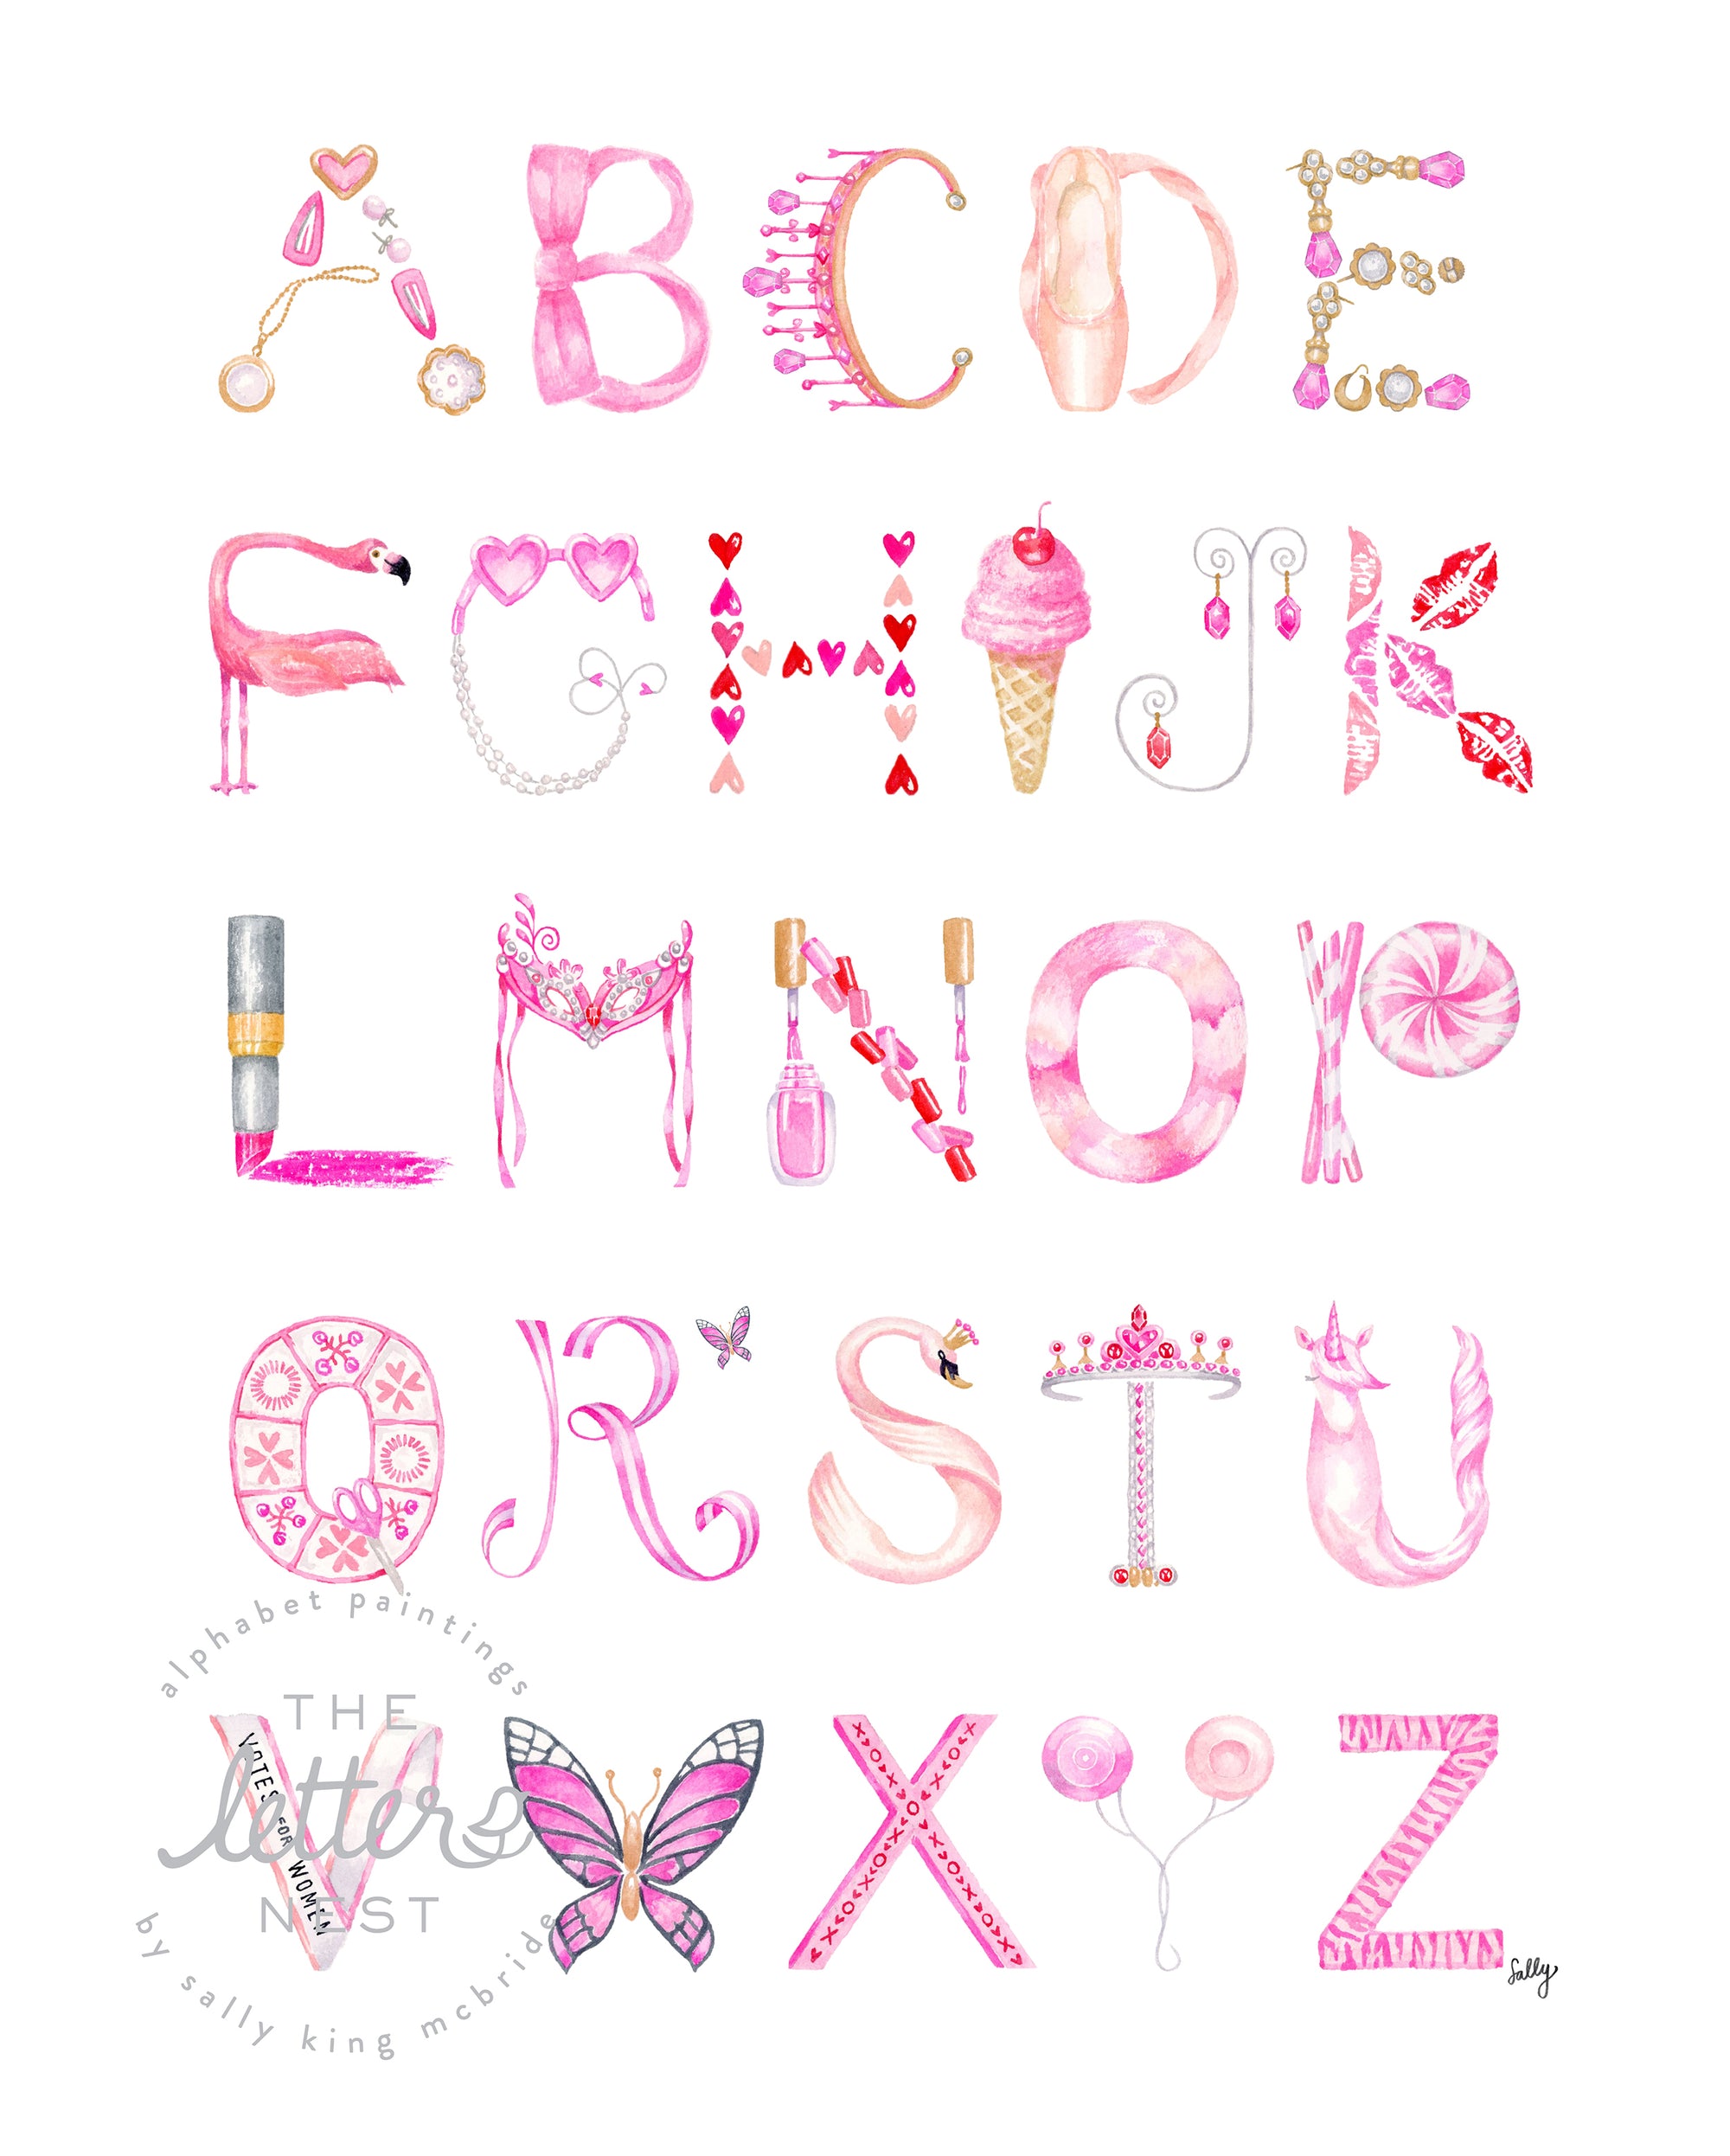 Annabel Alphabet features all pink letters in objects inspired by 21st-century girlhood